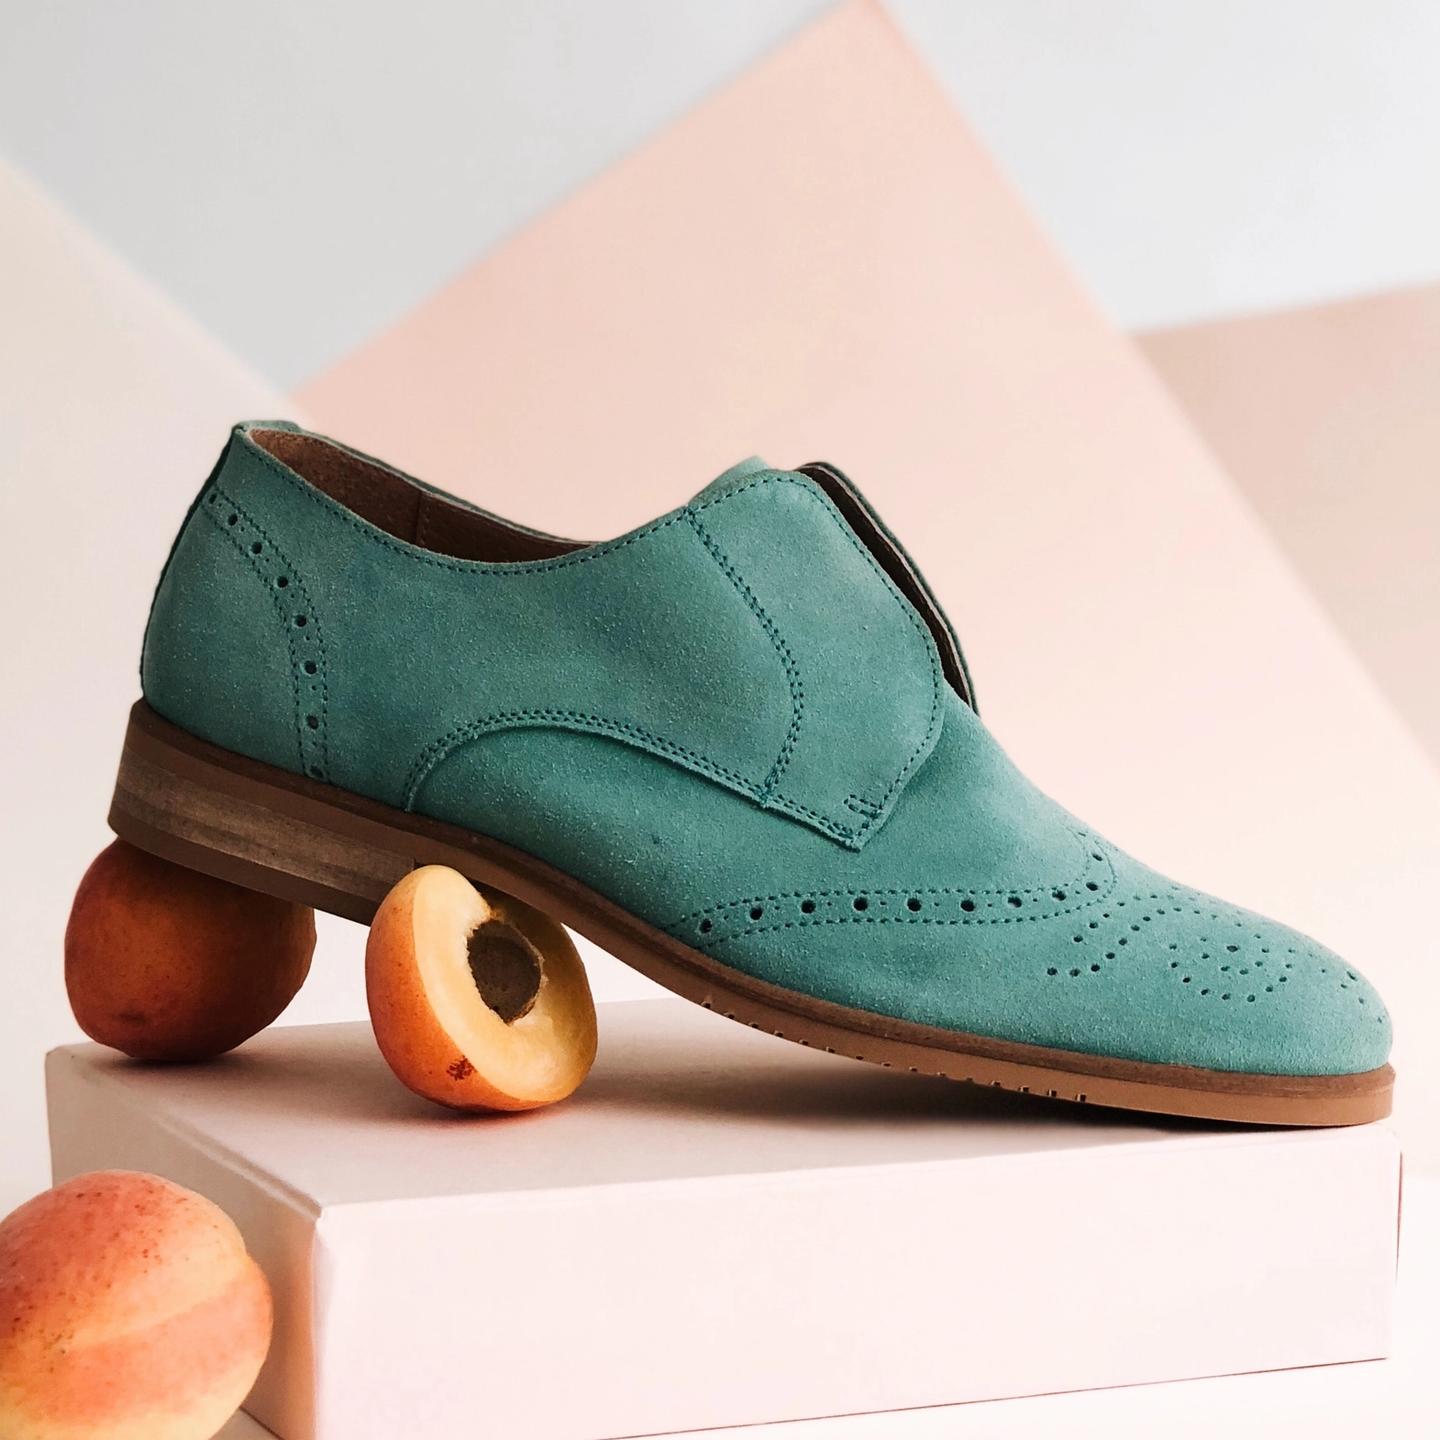 A green shoe with apricots beneath it​​​​‌﻿‍﻿​‍​‍‌‍﻿﻿‌﻿​‍‌‍‍‌‌‍‌﻿‌‍‍‌‌‍﻿‍​‍​‍​﻿‍‍​‍​‍‌﻿​﻿‌‍​‌‌‍﻿‍‌‍‍‌‌﻿‌​‌﻿‍‌​‍﻿‍‌‍‍‌‌‍﻿﻿​‍​‍​‍﻿​​‍​‍‌‍‍​‌﻿​‍‌‍‌‌‌‍‌‍​‍​‍​﻿‍‍​‍​‍‌‍‍​‌﻿‌​‌﻿‌​‌﻿​​‌﻿​﻿​﻿‍‍​‍﻿﻿​‍﻿﻿‌﻿‌‍‌‍‍‌‌﻿​﻿‌﻿‌‌‌‍​‌‌‍﻿​​‍﻿‌‌‍‌‌‌‍‌​‌‍‍‌‌﻿‌​‌‍‍‌‌‍﻿‍‌‍‌﻿​‍﻿‌‌﻿​﻿‌﻿‌​‌﻿‌‌‌‍‌​‌‍‍‌‌‍﻿﻿​‍﻿‍‌﻿​﻿‌‍​‌‌‍﻿‍‌‍‍‌‌﻿‌​‌﻿‍‌​‍﻿‍‌‍​‍‌﻿‌‌‌‍‍‌‌‍﻿​‌‍‌​​‍﻿﻿‌﻿​‍‌‍‌‌‌‍﻿‌‌‍‍‌‌﻿‍​​‍﻿﻿‌‍‍‌‌‍﻿‍‌﻿‌​‌‍‌‌‌‍﻿‍‌﻿‌​​‍﻿﻿‌‍‌‌‌‍‌​‌‍‍‌‌﻿‌​​‍﻿﻿‌‍﻿‌‌‍﻿﻿‌‍‌​‌‍‌‌​﻿﻿‌‌﻿​​‌﻿​‍‌‍‌‌‌﻿​﻿‌‍‌‌‌‍﻿‍‌﻿‌​‌‍​‌‌﻿‌​‌‍‍‌‌‍﻿﻿‌‍﻿‍​﻿‍﻿‌‍‍‌‌‍‌​​﻿﻿‌‌‍​‍​﻿‍‌​﻿‌‌​﻿‌‍‌‍​﻿‌‍‌‍​﻿‌﻿‌‍​‍​‍﻿‌‌‍​‌​﻿‌﻿‌‍​‍​﻿‌﻿​‍﻿‌​﻿‌​‌‍‌‌​﻿‌‌​﻿‌‍​‍﻿‌‌‍​‌​﻿​‌​﻿‌‍‌‍‌‍​‍﻿‌‌‍​‍‌‍​‌‌‍‌​​﻿‍​‌‍‌‌‌‍‌‌​﻿​﻿​﻿‍‌​﻿​‍‌‍‌‌​﻿​﻿​﻿‌​​﻿‍﻿‌﻿‌​‌﻿‍‌‌﻿​​‌‍‌‌​﻿﻿‌‌﻿​﻿‌‍‍​‌‍﻿﻿‌‍‌‌​﻿‍﻿‌﻿​​‌‍​‌‌﻿‌​‌‍‍​​﻿﻿‌‌‍﻿‌‌‍‌‌‌‍‌​‌‍‍‌‌‍​‌​‍‌‌​﻿‌‌‌​​‍‌‌﻿﻿‌‍‍﻿‌‍‌‌‌﻿‍‌​‍‌‌​﻿​﻿‌​‌​​‍‌‌​﻿​﻿‌​‌​​‍‌‌​﻿​‍​﻿​‍​﻿‌‍​﻿​​​﻿​​‌‍​﻿‌‍‌‌​﻿​​​﻿​‍‌‍​‌‌‍​﻿‌‍​‌​﻿‍‌​﻿‌‌​‍‌‌​﻿​‍​﻿​‍​‍‌‌​﻿‌‌‌​‌​​‍﻿‍‌‍​‌‌‍﻿​‌﻿‌​​﻿‍﻿‌﻿‌​‌‍﻿﻿‌‍﻿﻿‌‍﻿​​﻿﻿‌‌﻿​​‌﻿​‍‌‍‌‌‌﻿​﻿‌‍‌‌‌‍﻿‍‌﻿‌​‌‍​‌‌﻿‌​‌‍‍‌‌‍﻿﻿‌‍﻿‍​﻿﻿﻿‌‍​‍‌‍​‌‌﻿​﻿‌‍‌‌‌‌‌‌‌﻿​‍‌‍﻿​​﻿﻿‌‌‍‍​‌﻿‌​‌﻿‌​‌﻿​​‌﻿​﻿​‍‌‌​﻿​﻿‌​​‌​‍‌‌​﻿​‍‌​‌‍​‍‌‌​﻿​‍‌​‌‍‌﻿‌‍‌‍‍‌‌﻿​﻿‌﻿‌‌‌‍​‌‌‍﻿​​‍﻿‌‌‍‌‌‌‍‌​‌‍‍‌‌﻿‌​‌‍‍‌‌‍﻿‍‌‍‌﻿​‍﻿‌‌﻿​﻿‌﻿‌​‌﻿‌‌‌‍‌​‌‍‍‌‌‍﻿﻿​‍﻿‍‌﻿​﻿‌‍​‌‌‍﻿‍‌‍‍‌‌﻿‌​‌﻿‍‌​‍﻿‍‌‍​‍‌﻿‌‌‌‍‍‌‌‍﻿​‌‍‌​​‍‌‍‌‍‍‌‌‍‌​​﻿﻿‌‌‍​‍​﻿‍‌​﻿‌‌​﻿‌‍‌‍​﻿‌‍‌‍​﻿‌﻿‌‍​‍​‍﻿‌‌‍​‌​﻿‌﻿‌‍​‍​﻿‌﻿​‍﻿‌​﻿‌​‌‍‌‌​﻿‌‌​﻿‌‍​‍﻿‌‌‍​‌​﻿​‌​﻿‌‍‌‍‌‍​‍﻿‌‌‍​‍‌‍​‌‌‍‌​​﻿‍​‌‍‌‌‌‍‌‌​﻿​﻿​﻿‍‌​﻿​‍‌‍‌‌​﻿​﻿​﻿‌​​‍‌‍‌﻿‌​‌﻿‍‌‌﻿​​‌‍‌‌​﻿﻿‌‌﻿​﻿‌‍‍​‌‍﻿﻿‌‍‌‌​‍‌‍‌﻿​​‌‍​‌‌﻿‌​‌‍‍​​﻿﻿‌‌‍﻿‌‌‍‌‌‌‍‌​‌‍‍‌‌‍​‌​‍‌‌​﻿‌‌‌​​‍‌‌﻿﻿‌‍‍﻿‌‍‌‌‌﻿‍‌​‍‌‌​﻿​﻿‌​‌​​‍‌‌​﻿​﻿‌​‌​​‍‌‌​﻿​‍​﻿​‍​﻿‌‍​﻿​​​﻿​​‌‍​﻿‌‍‌‌​﻿​​​﻿​‍‌‍​‌‌‍​﻿‌‍​‌​﻿‍‌​﻿‌‌​‍‌‌​﻿​‍​﻿​‍​‍‌‌​﻿‌‌‌​‌​​‍﻿‍‌‍​‌‌‍﻿​‌﻿‌​​‍‌‍‌﻿‌﻿‌‍﻿﻿‌﻿​‍‌‍‍﻿‌﻿​﻿‌﻿​​‌‍​‌‌‍​﻿‌‍‌‌​﻿﻿‌‌﻿​‍‌‍‌‌‌‍﻿‌‌‍‍‌‌﻿‍​​‍‌‍‌﻿‌​‌‍﻿﻿‌‍﻿﻿‌‍﻿​​﻿﻿‌‌﻿​​‌﻿​‍‌‍‌‌‌﻿​﻿‌‍‌‌‌‍﻿‍‌﻿‌​‌‍​‌‌﻿‌​‌‍‍‌‌‍﻿﻿‌‍﻿‍​‍​‍‌﻿﻿‌